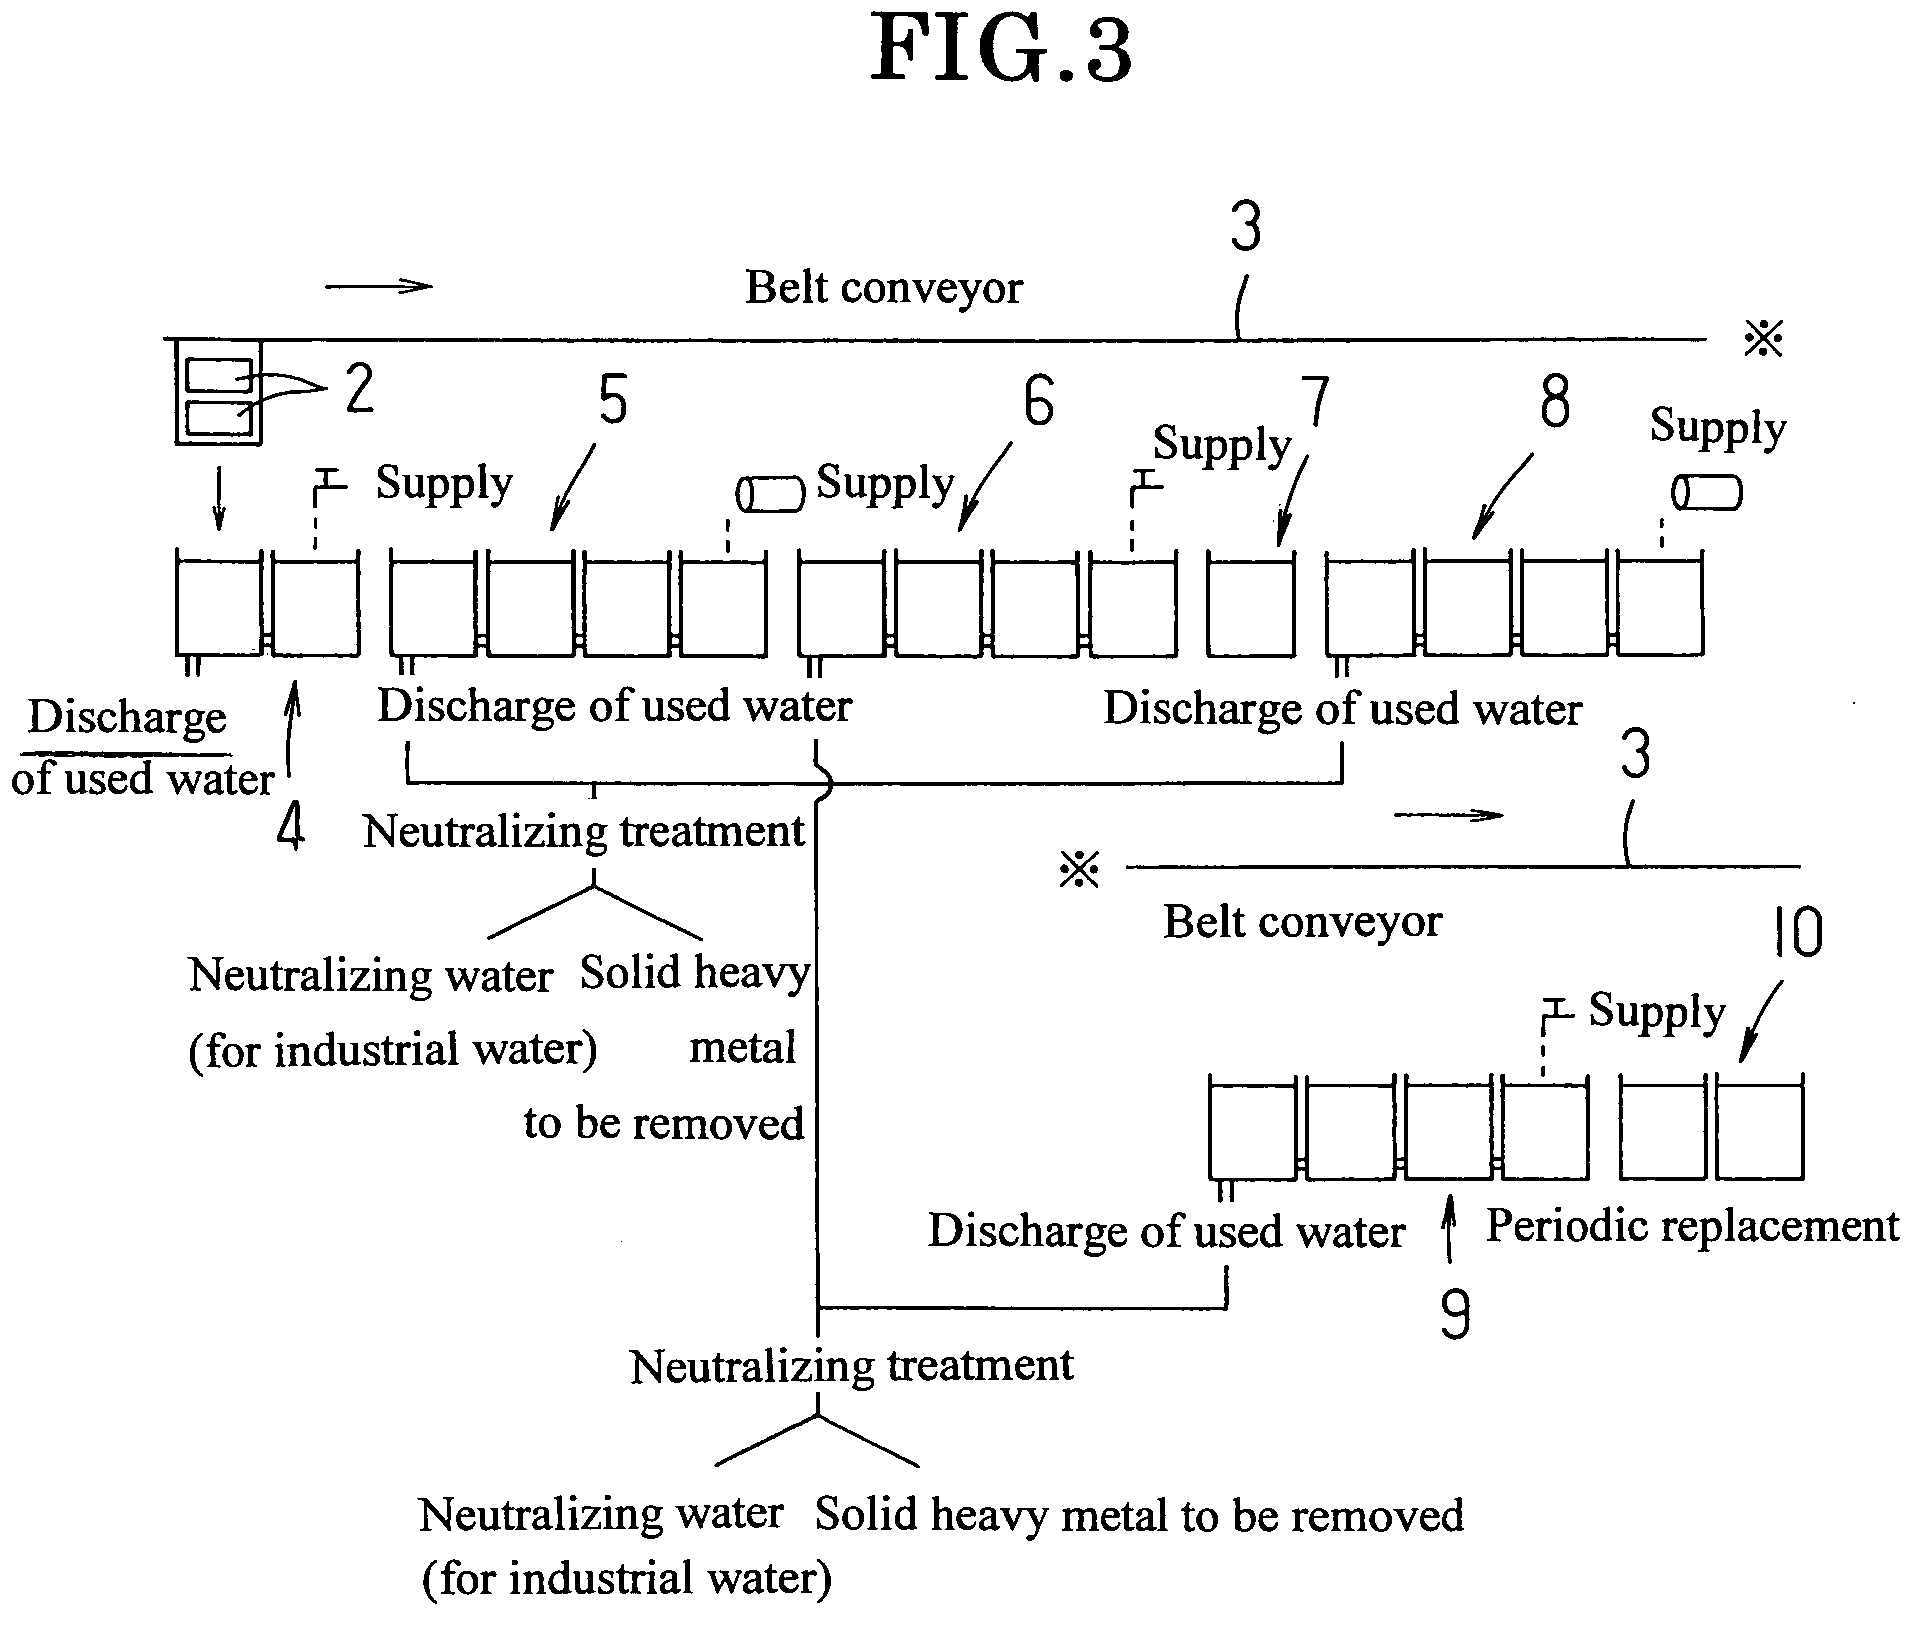 Method for preventing elution of lead and/or nickel from copper alloy piping material such as valve or pipe joint and copper alloy piping material, and fluid for use in cleaning piping material